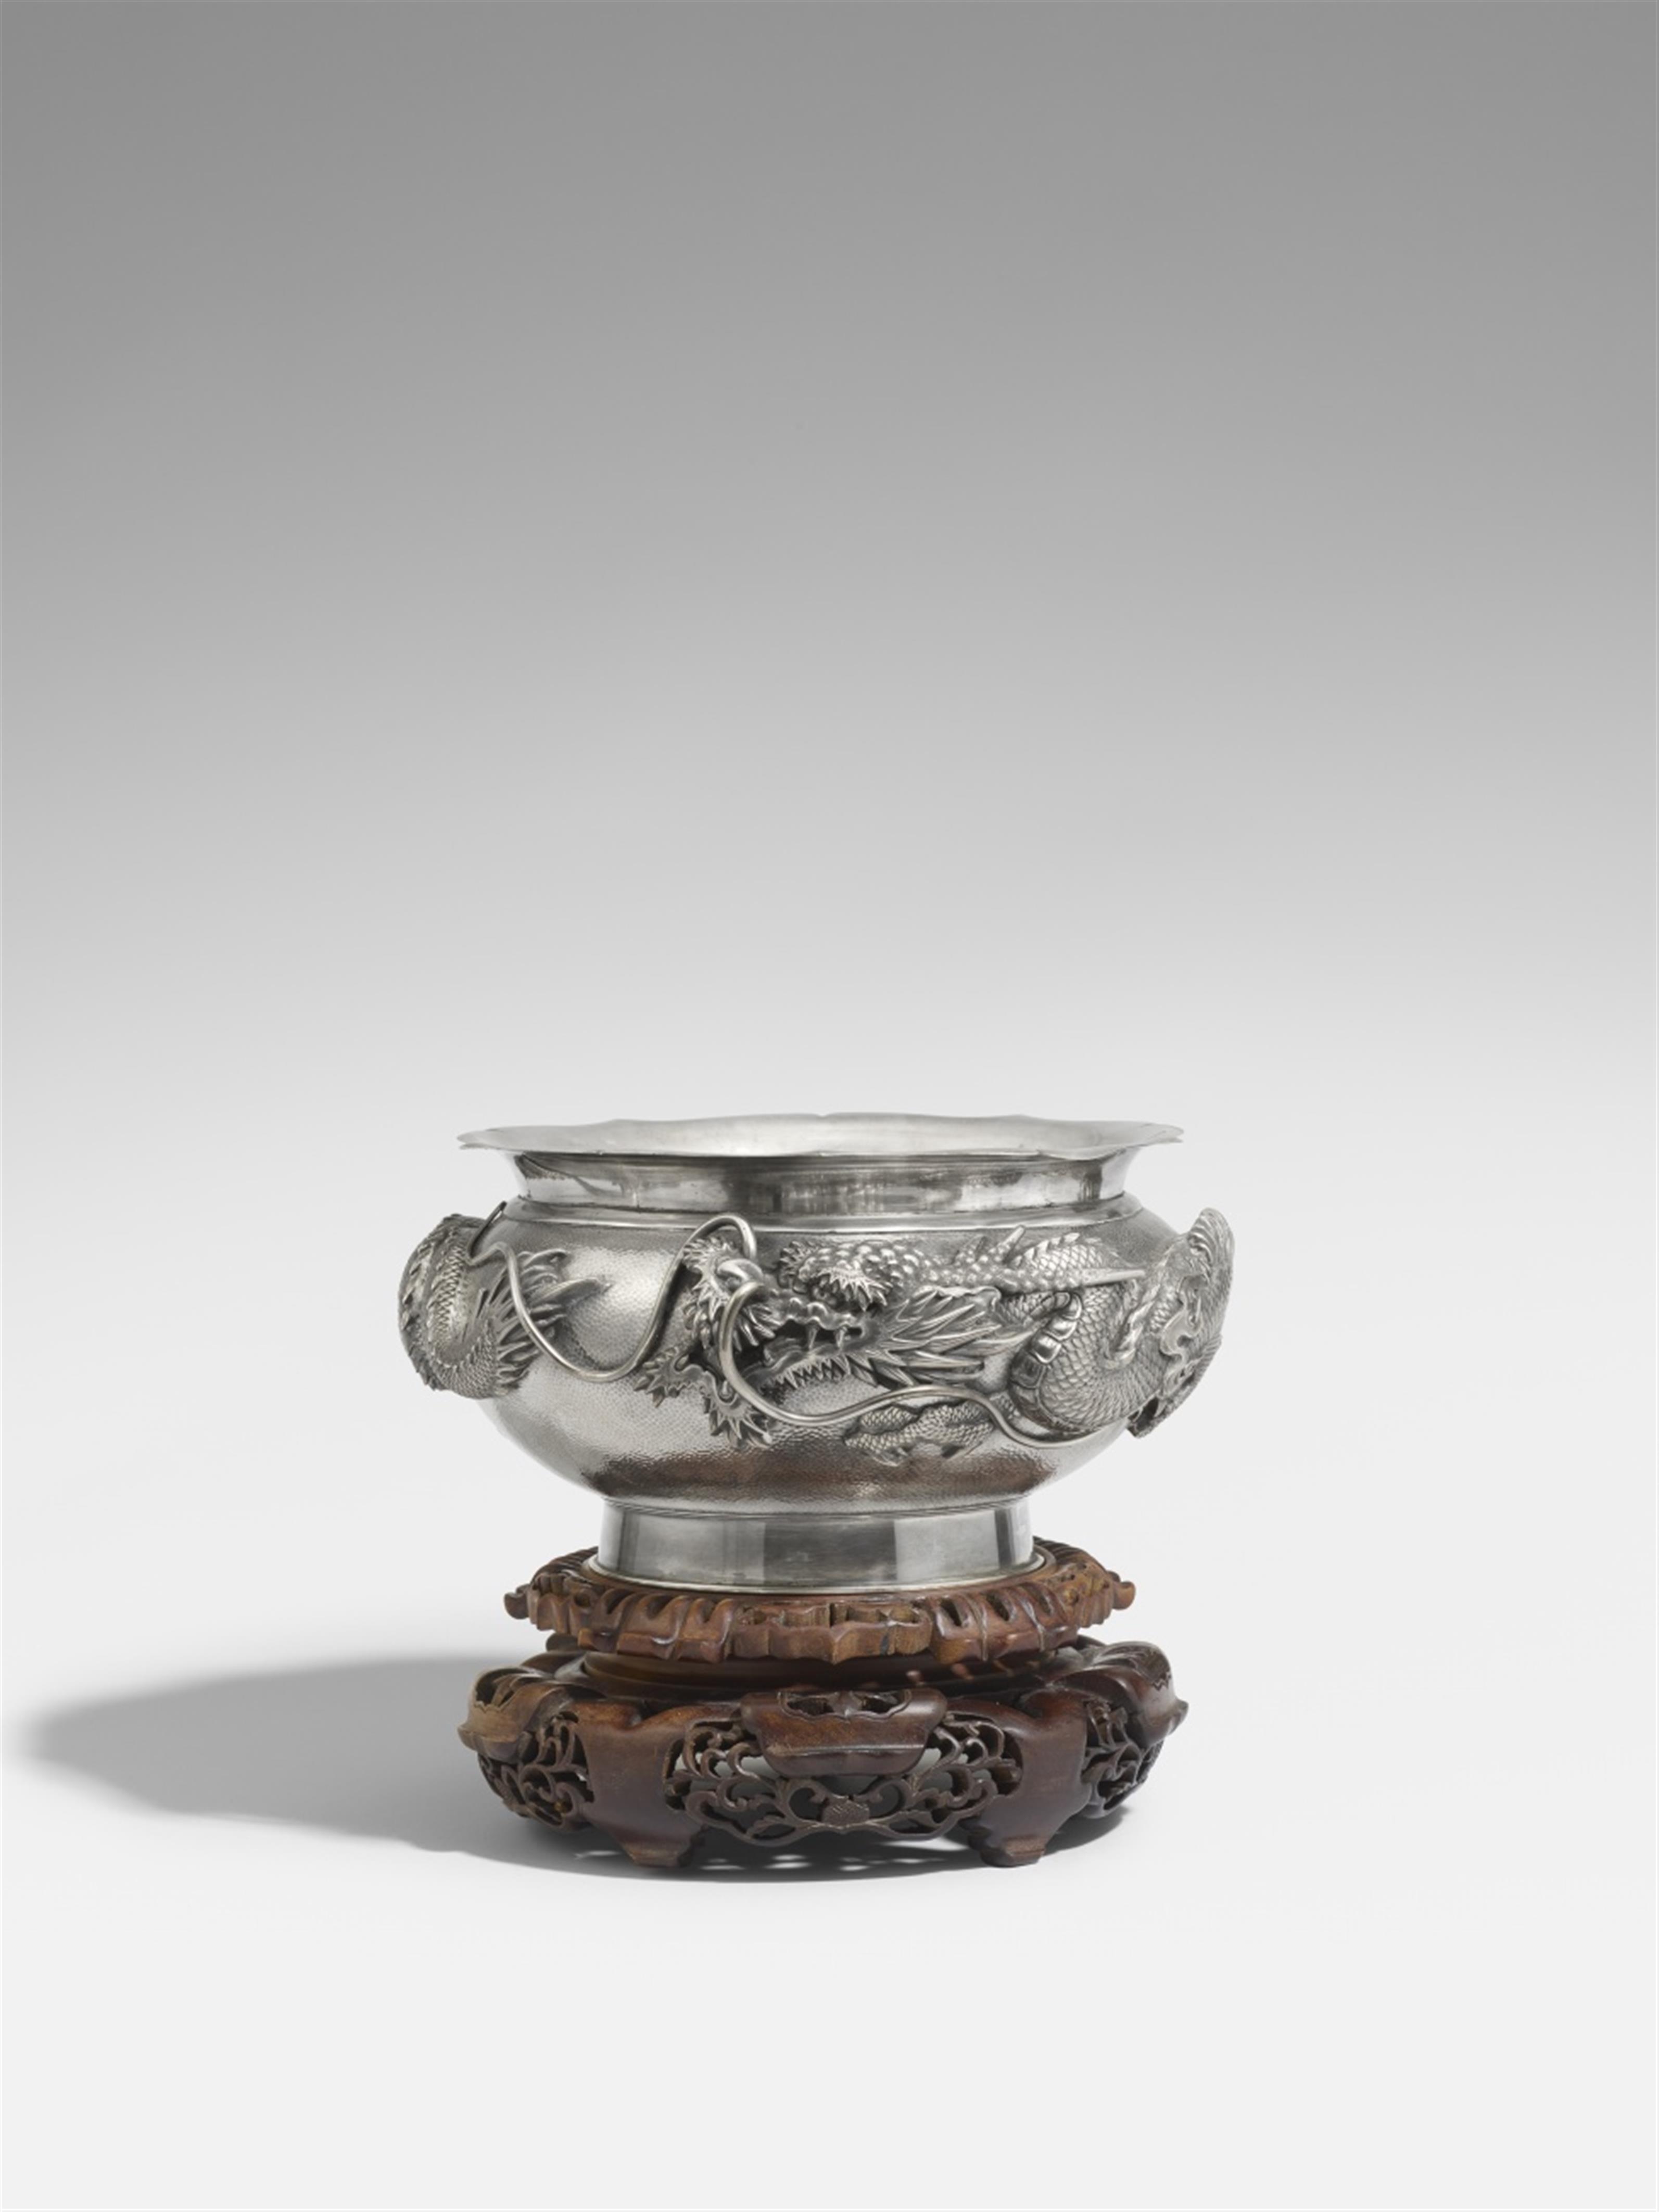 A large double-walled silver bowl. Around 1900 - image-1